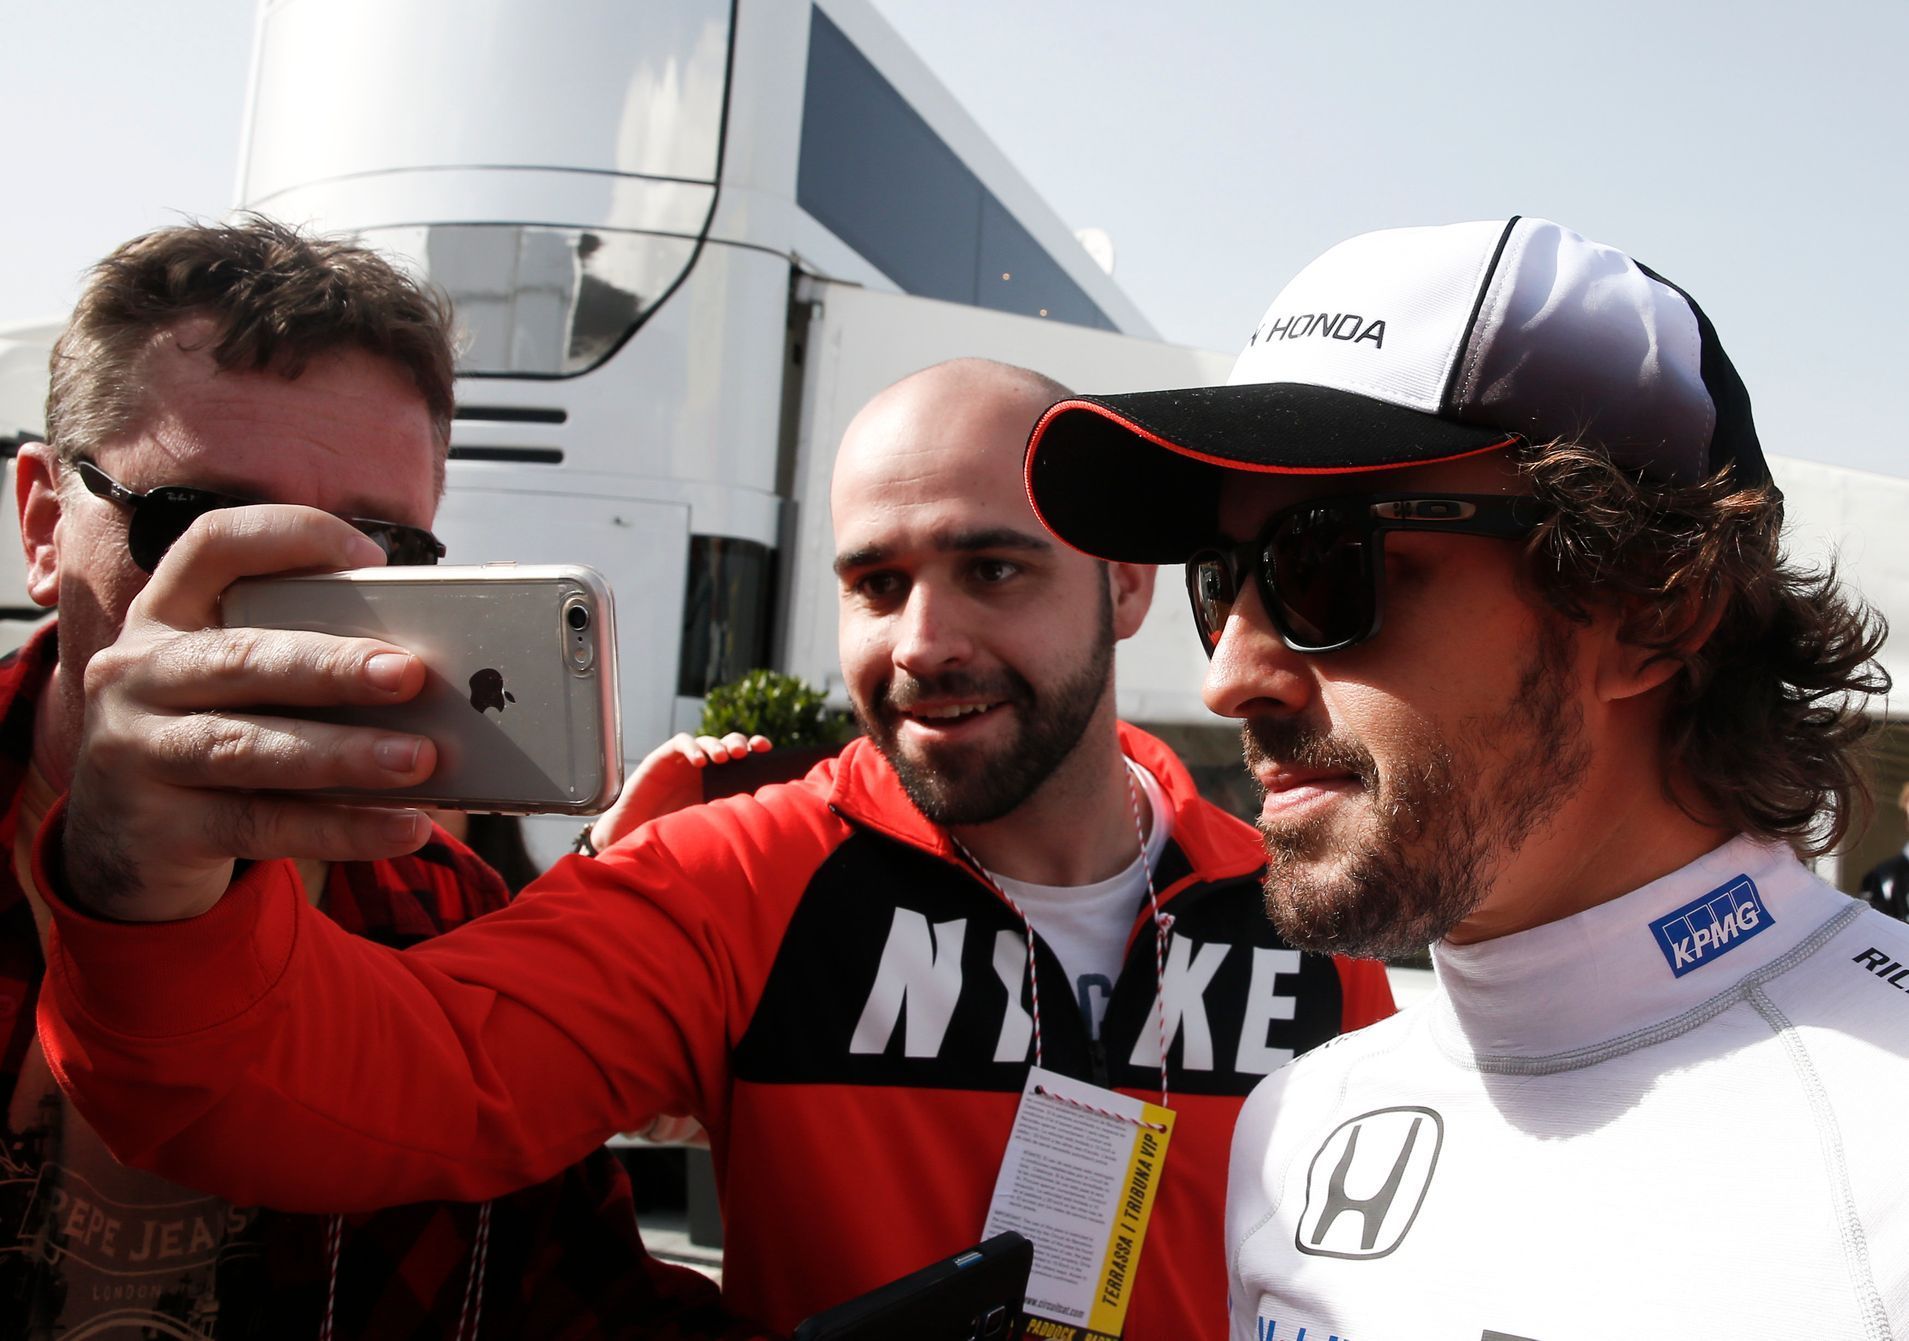 McLaren Formula One driver Alonso of Spain poses for a selfie with a supporter during the second testing session ahead of the upcoming season at the Circuit Barcelona-Catalunya in Montmelo